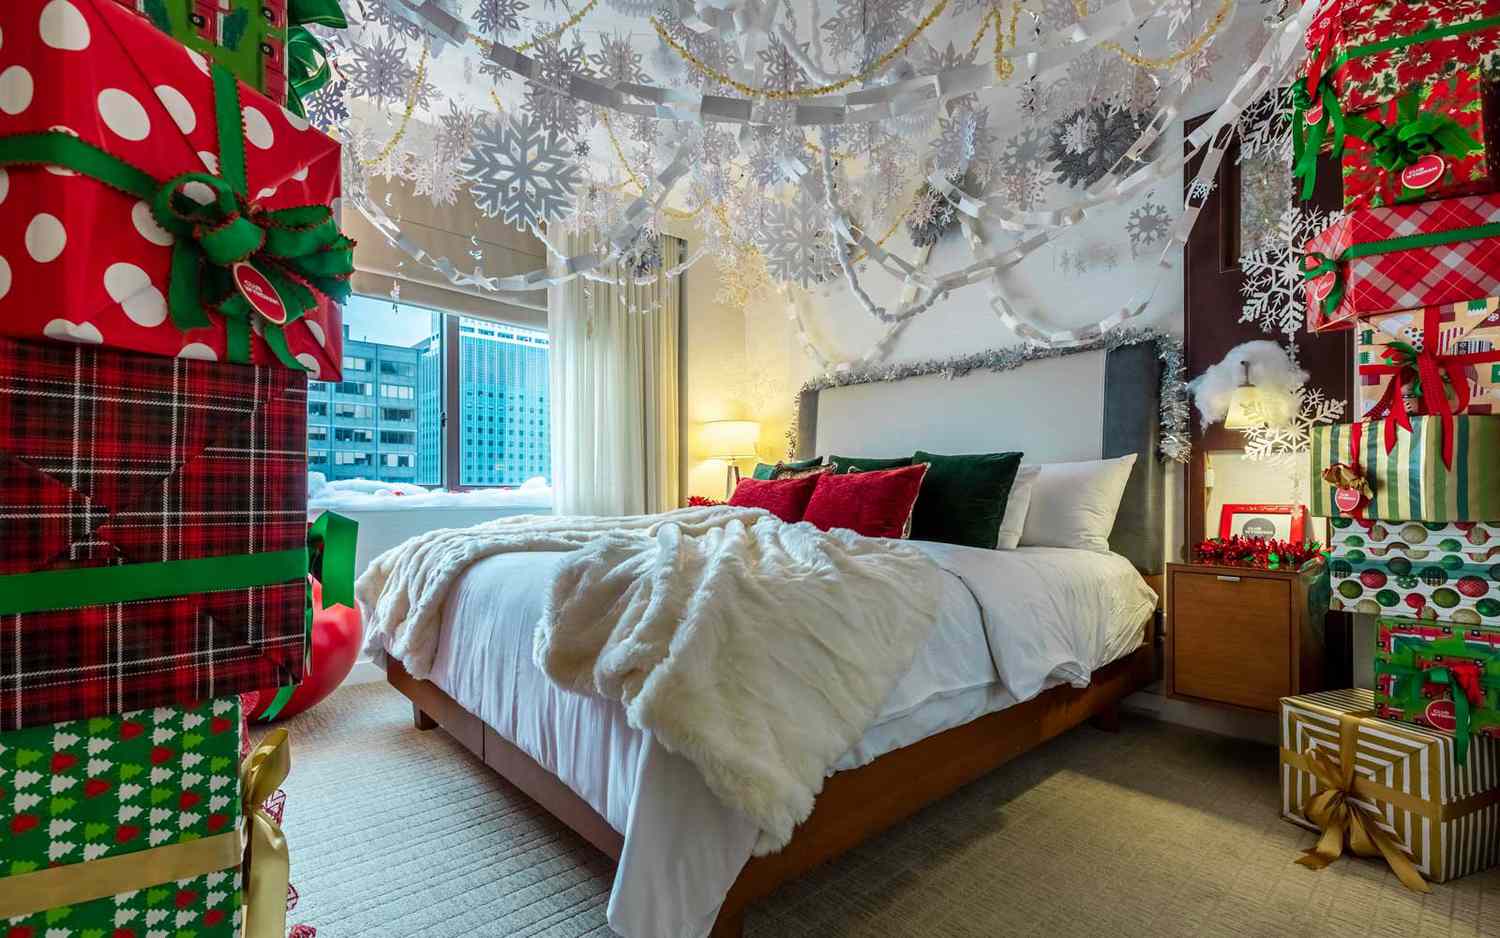 Elf Hotel Suite New York - Discover The Ultimate Christmas Getaway